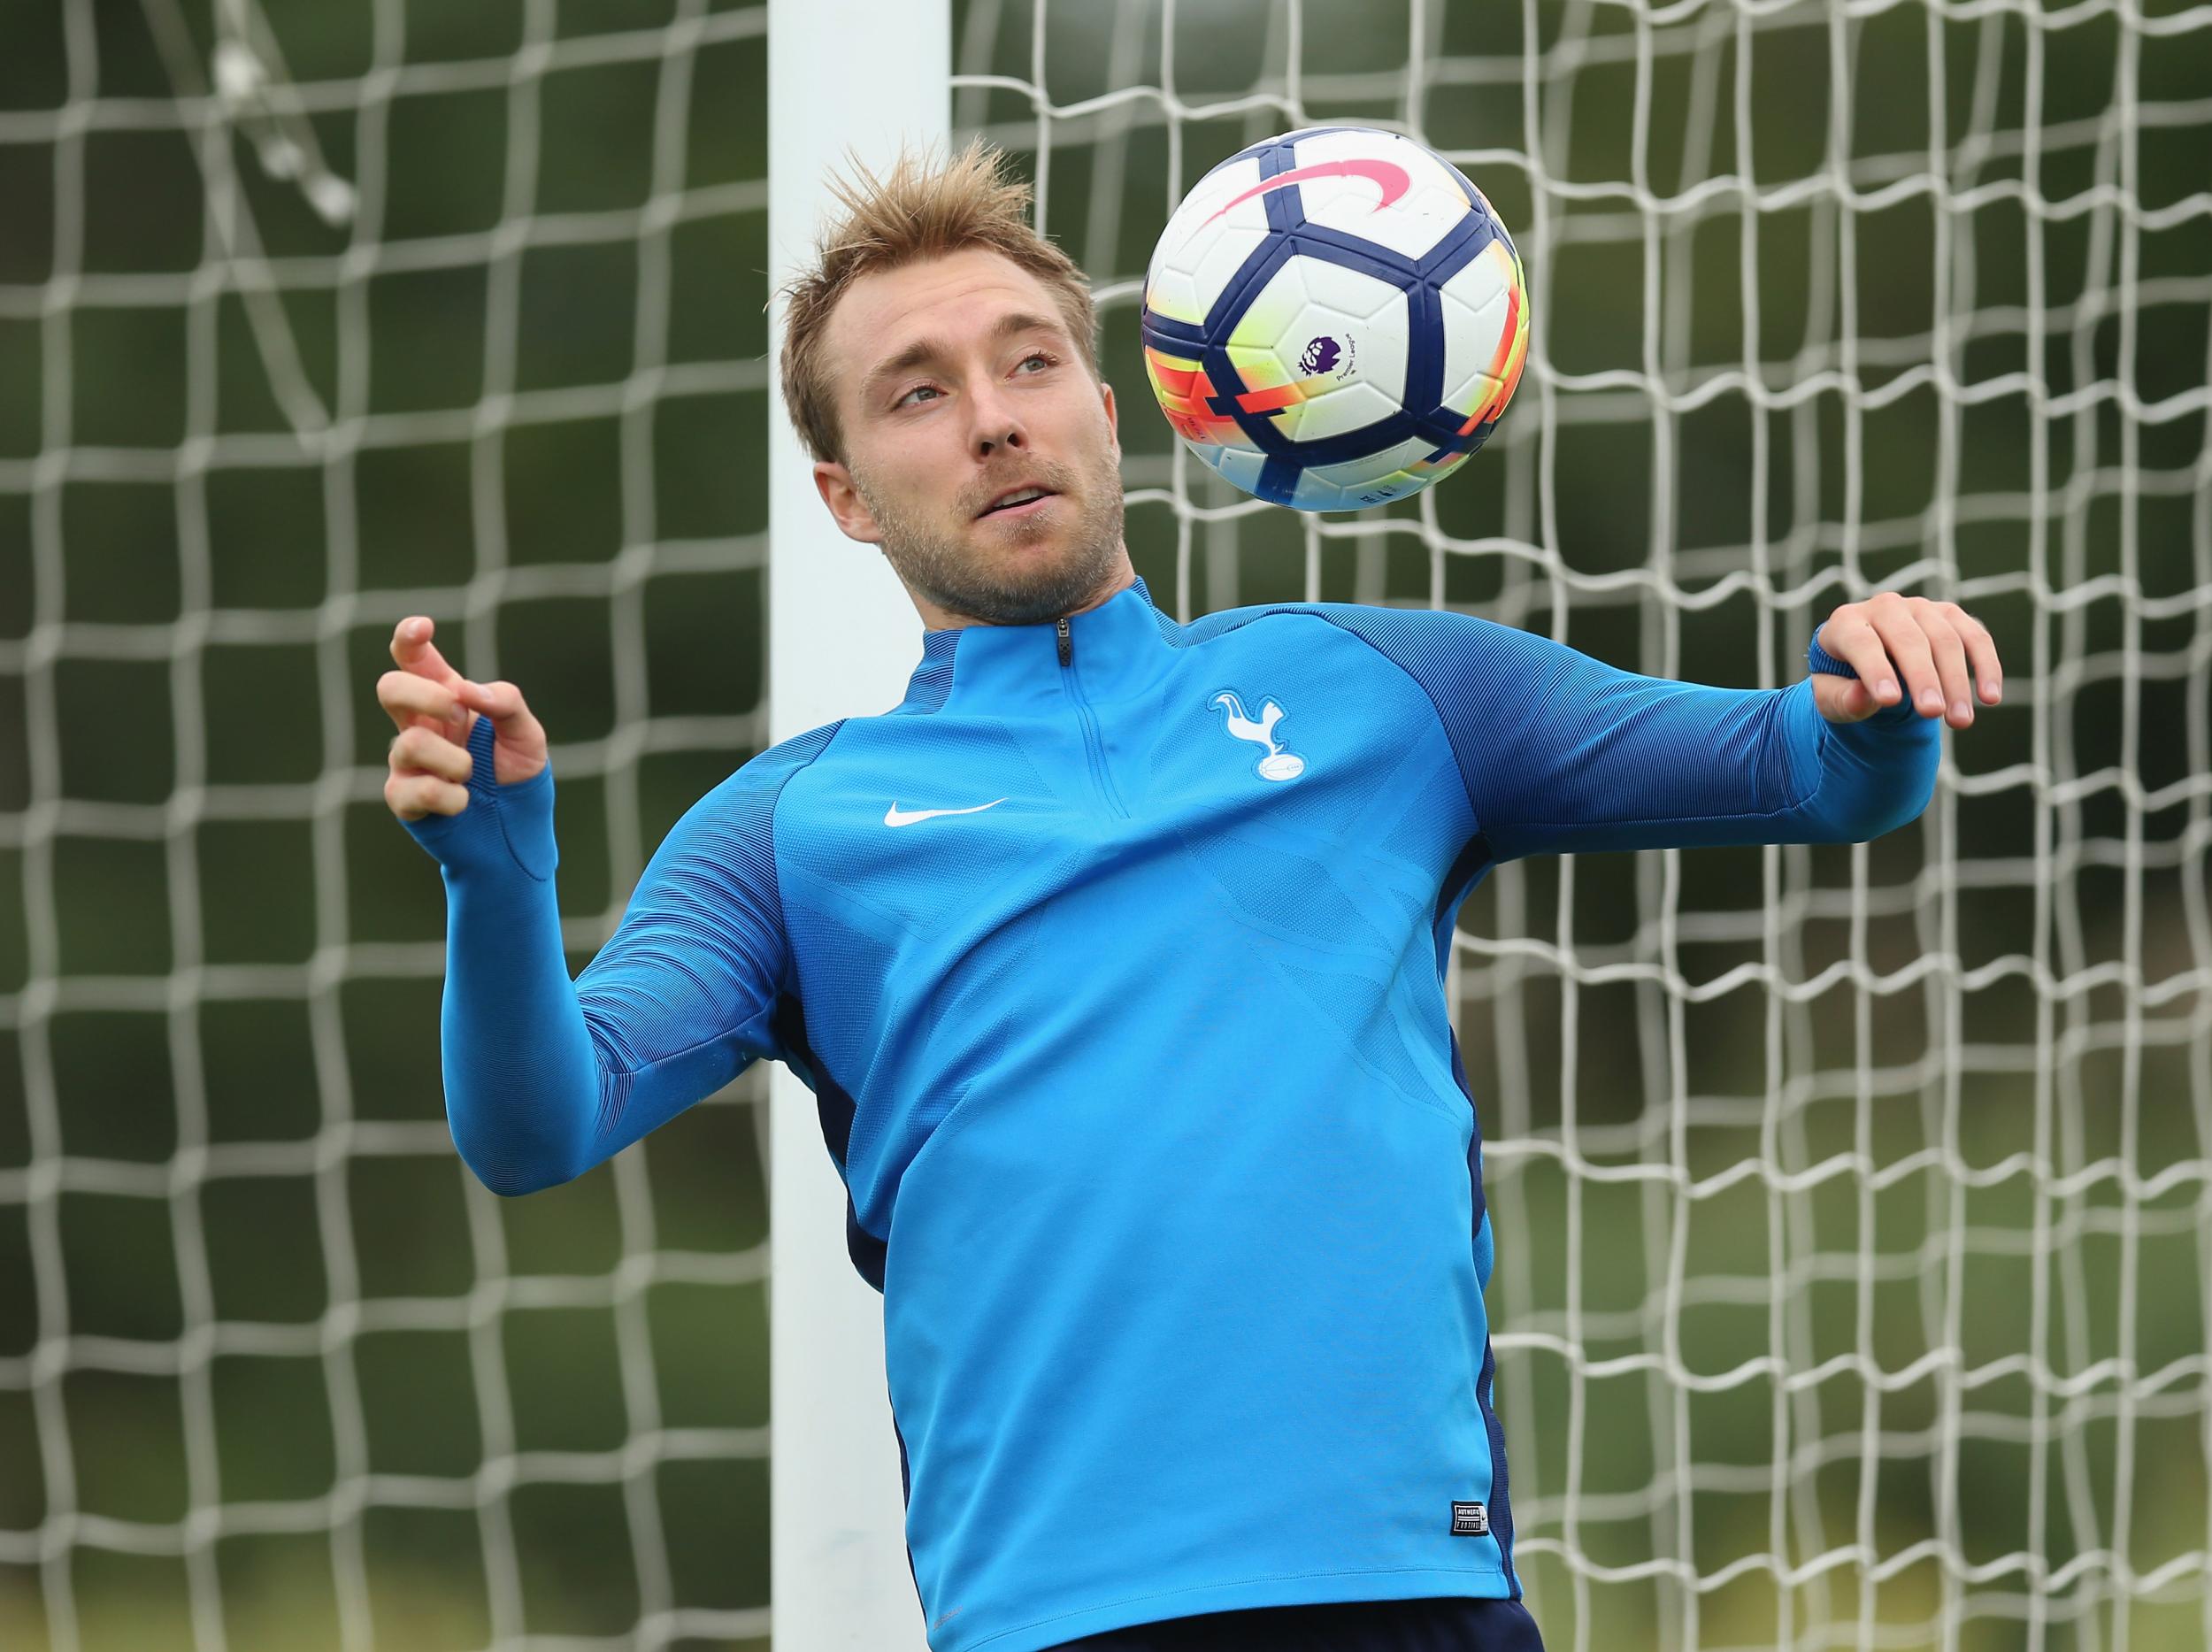 Eriksen moved to Spurs from Ajax in 2013